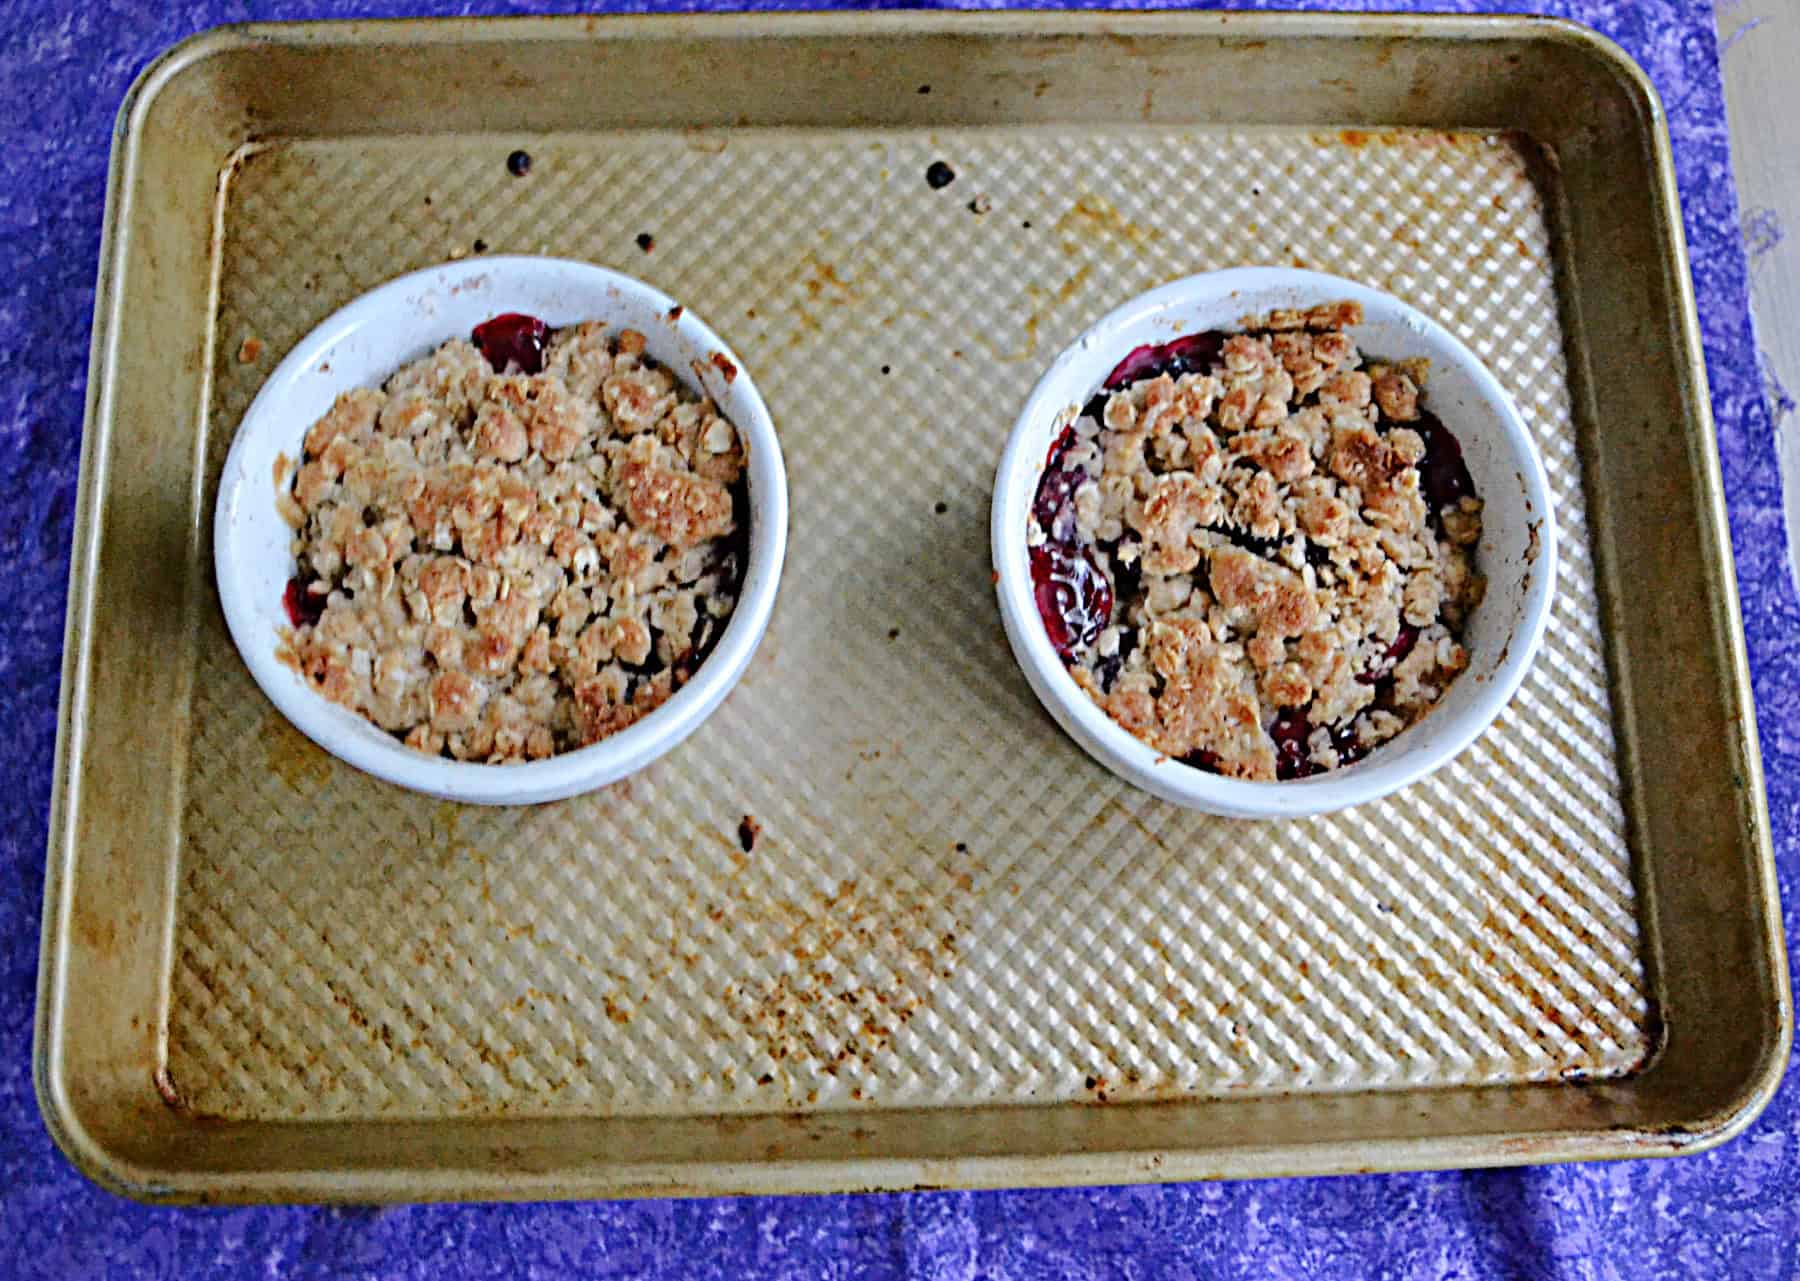 Two dishes of golden brown topped plum crisp.